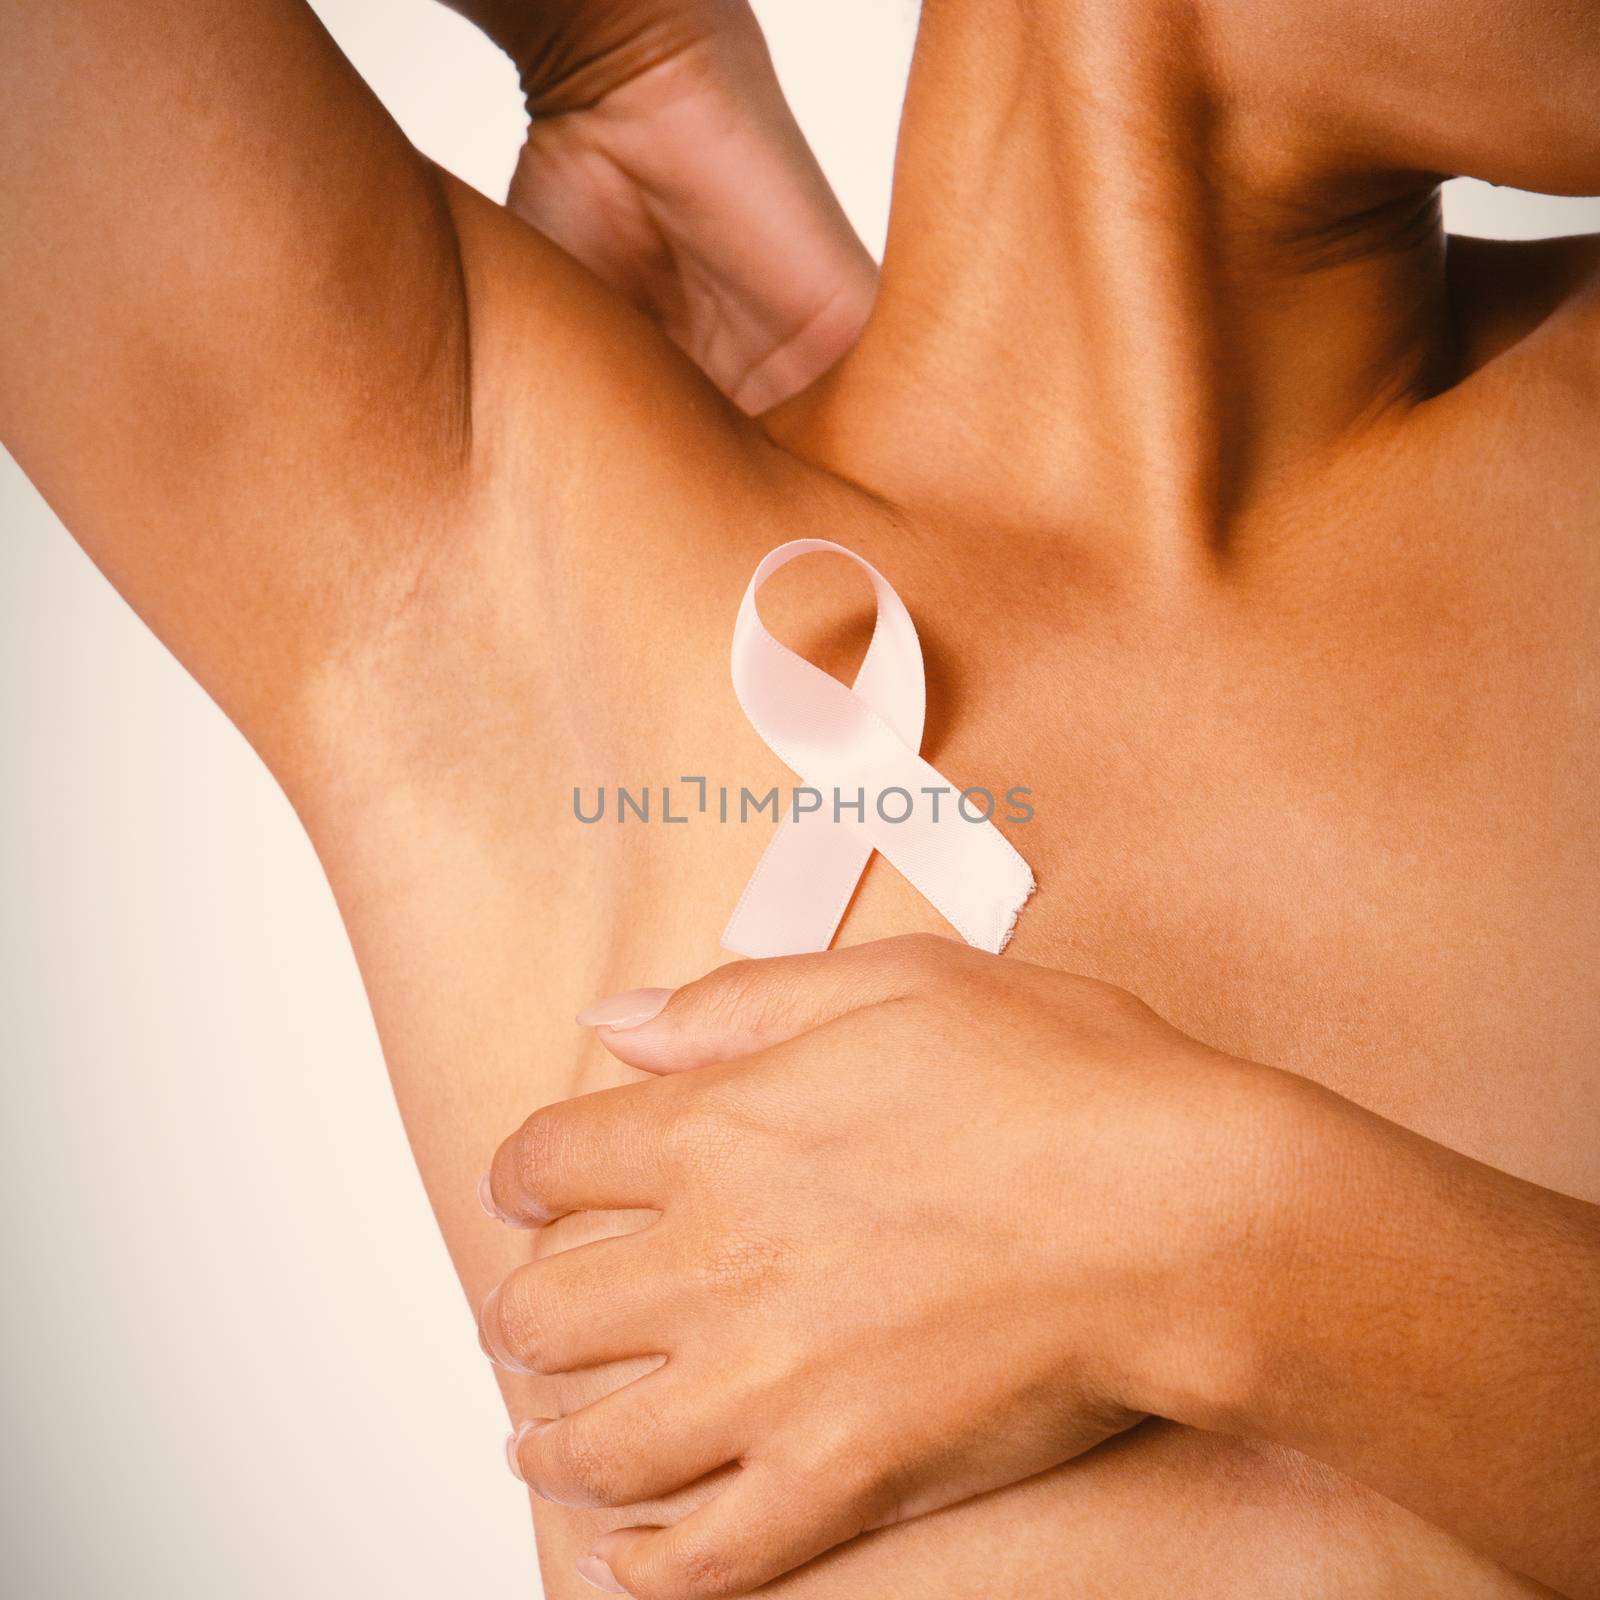 Shirtless woman for breast cancer awareness with ribbon on white background